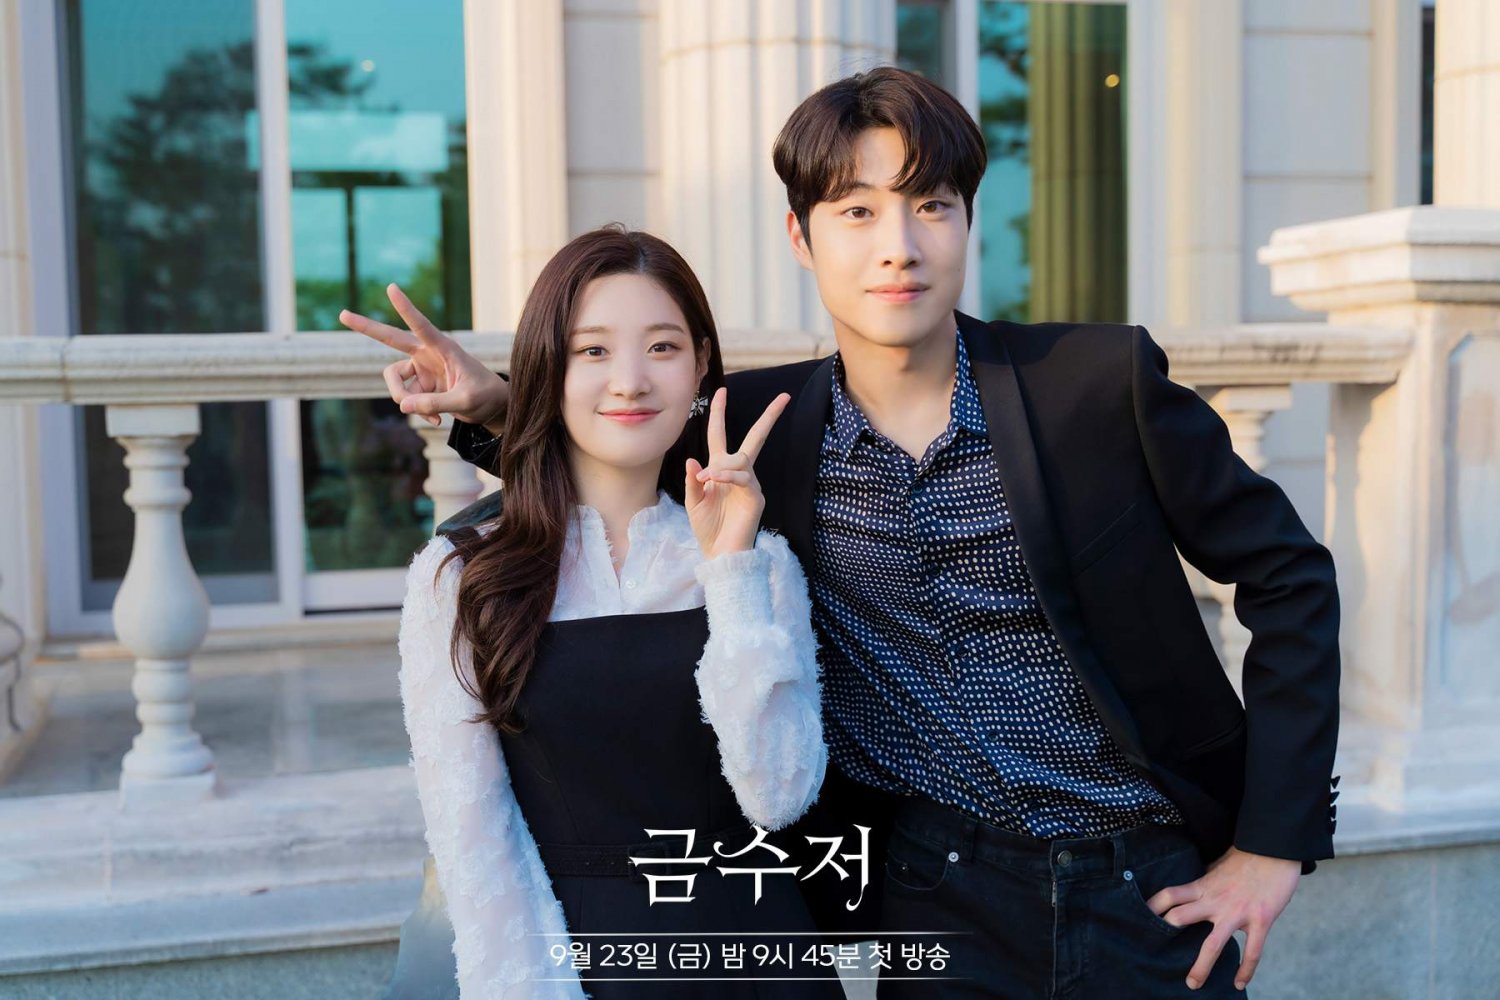 Photos New Behind The Scenes Images Added For The Upcoming Korean Drama The Golden Spoon 0657